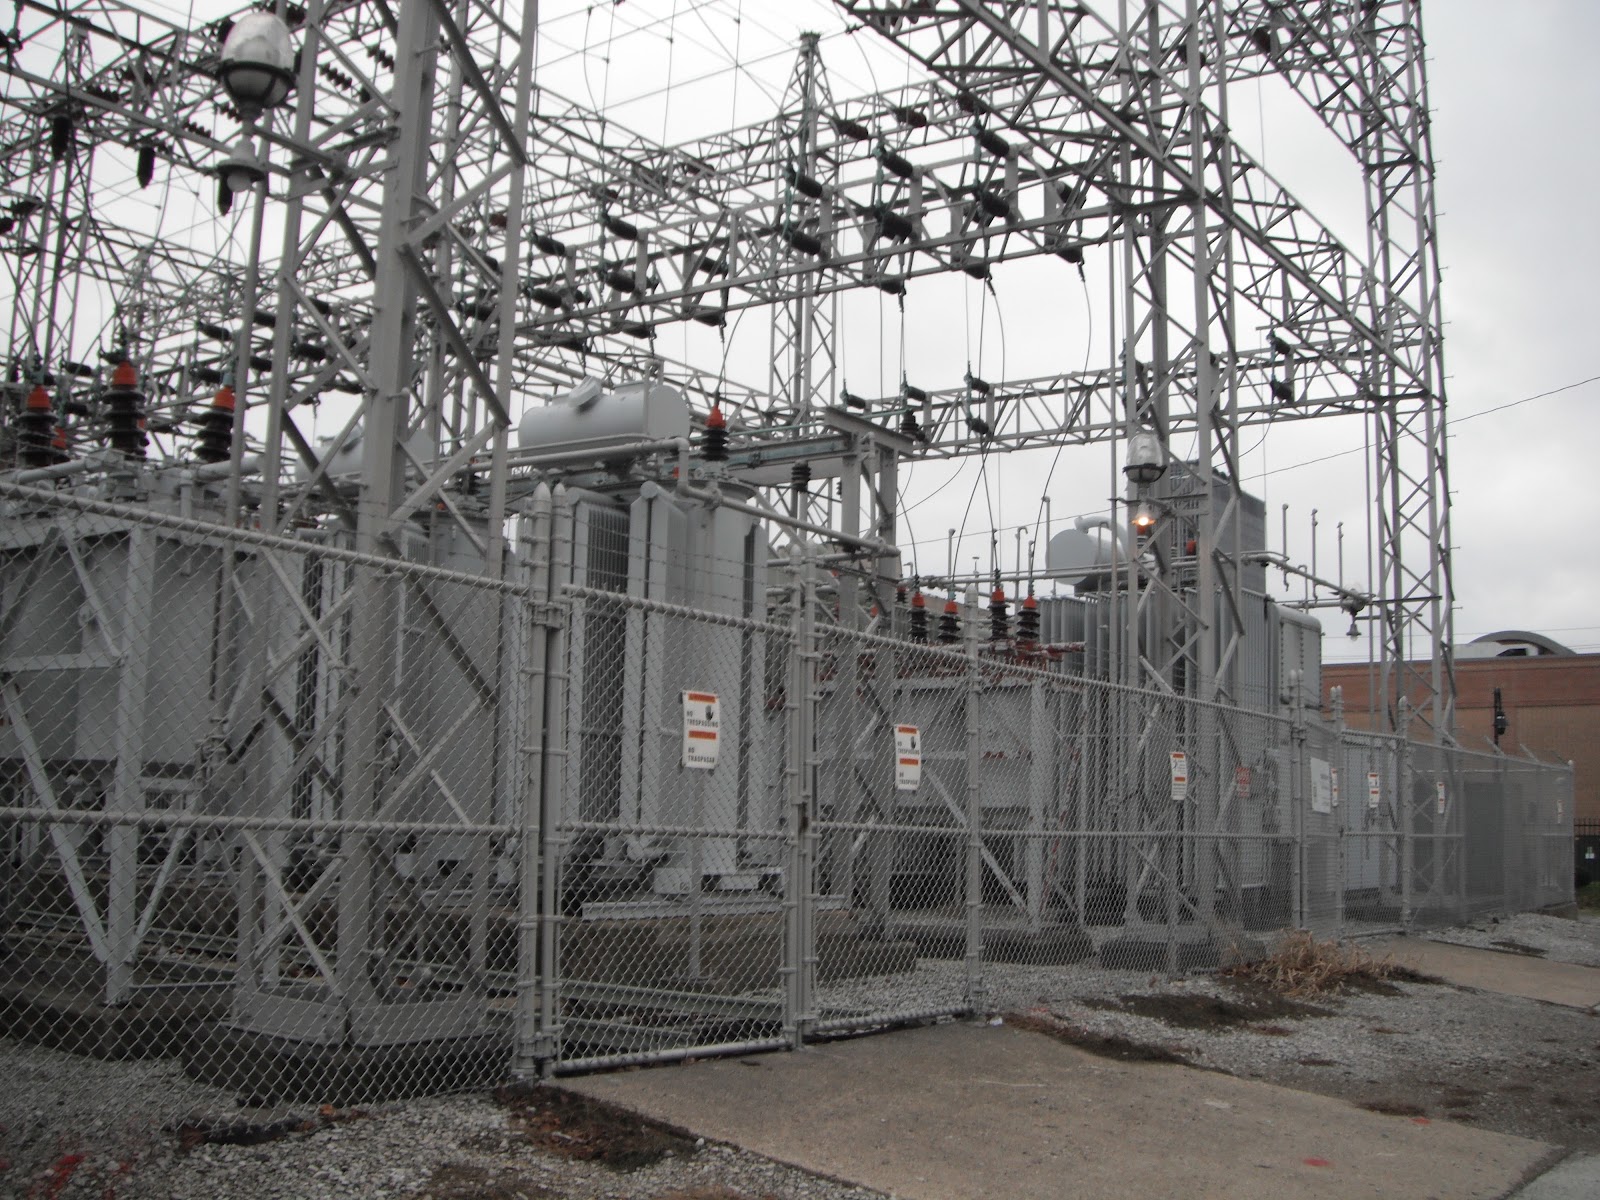 electrical substation in downtown Indy, near high-end housing